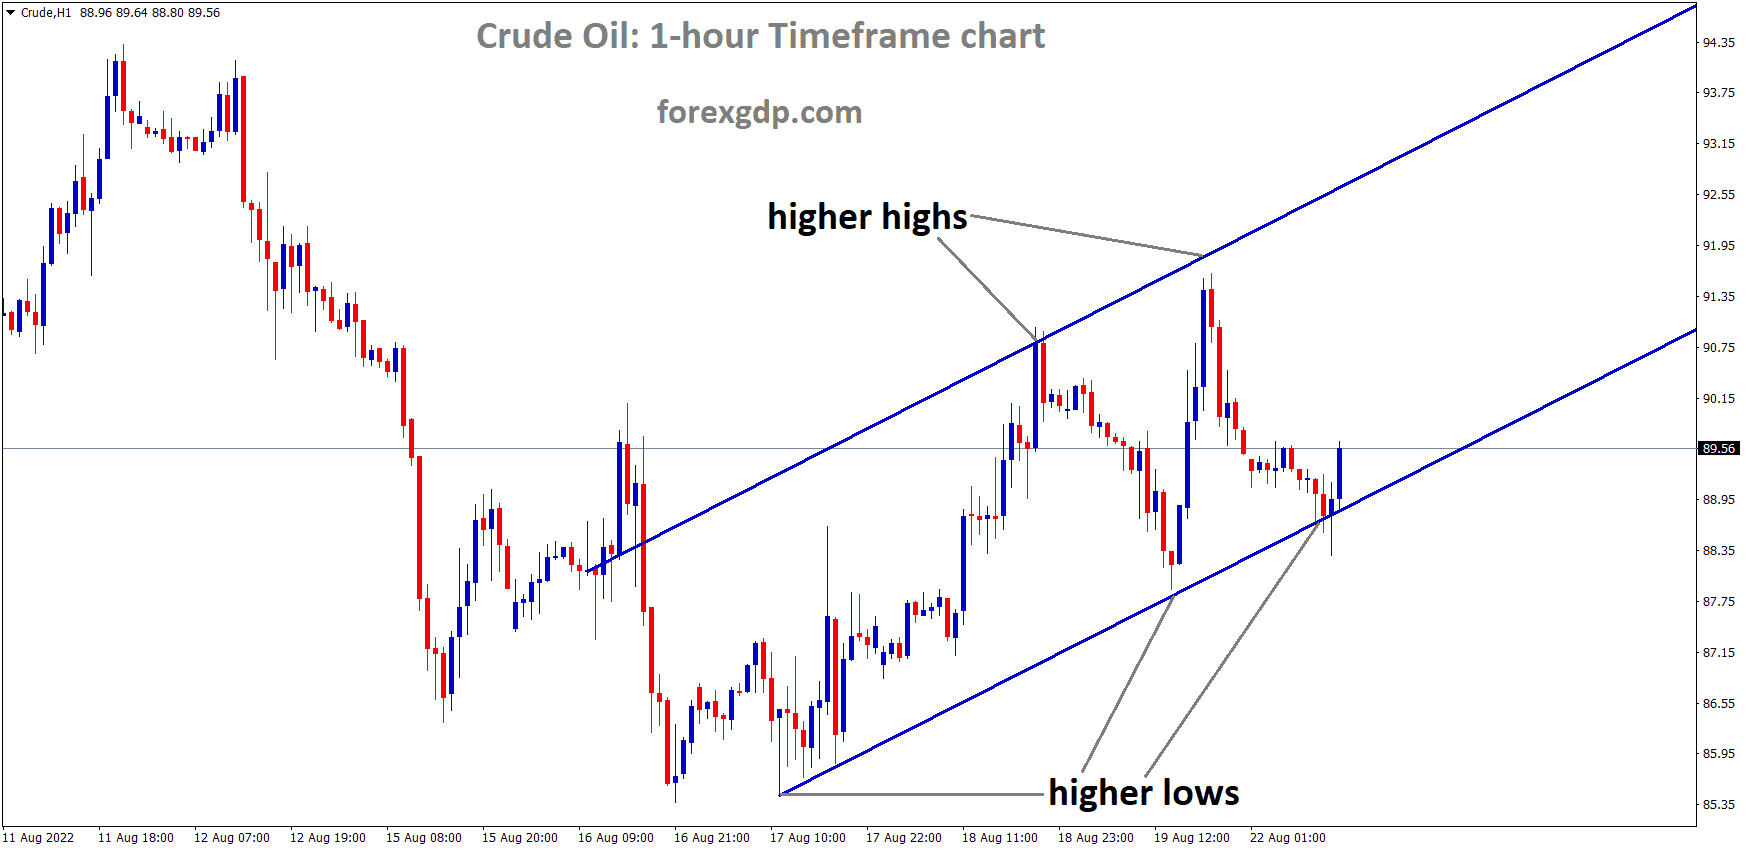 Crude Oil is moving in an Ascending channel and the Market has rebounded from the higher low area of the channel 1